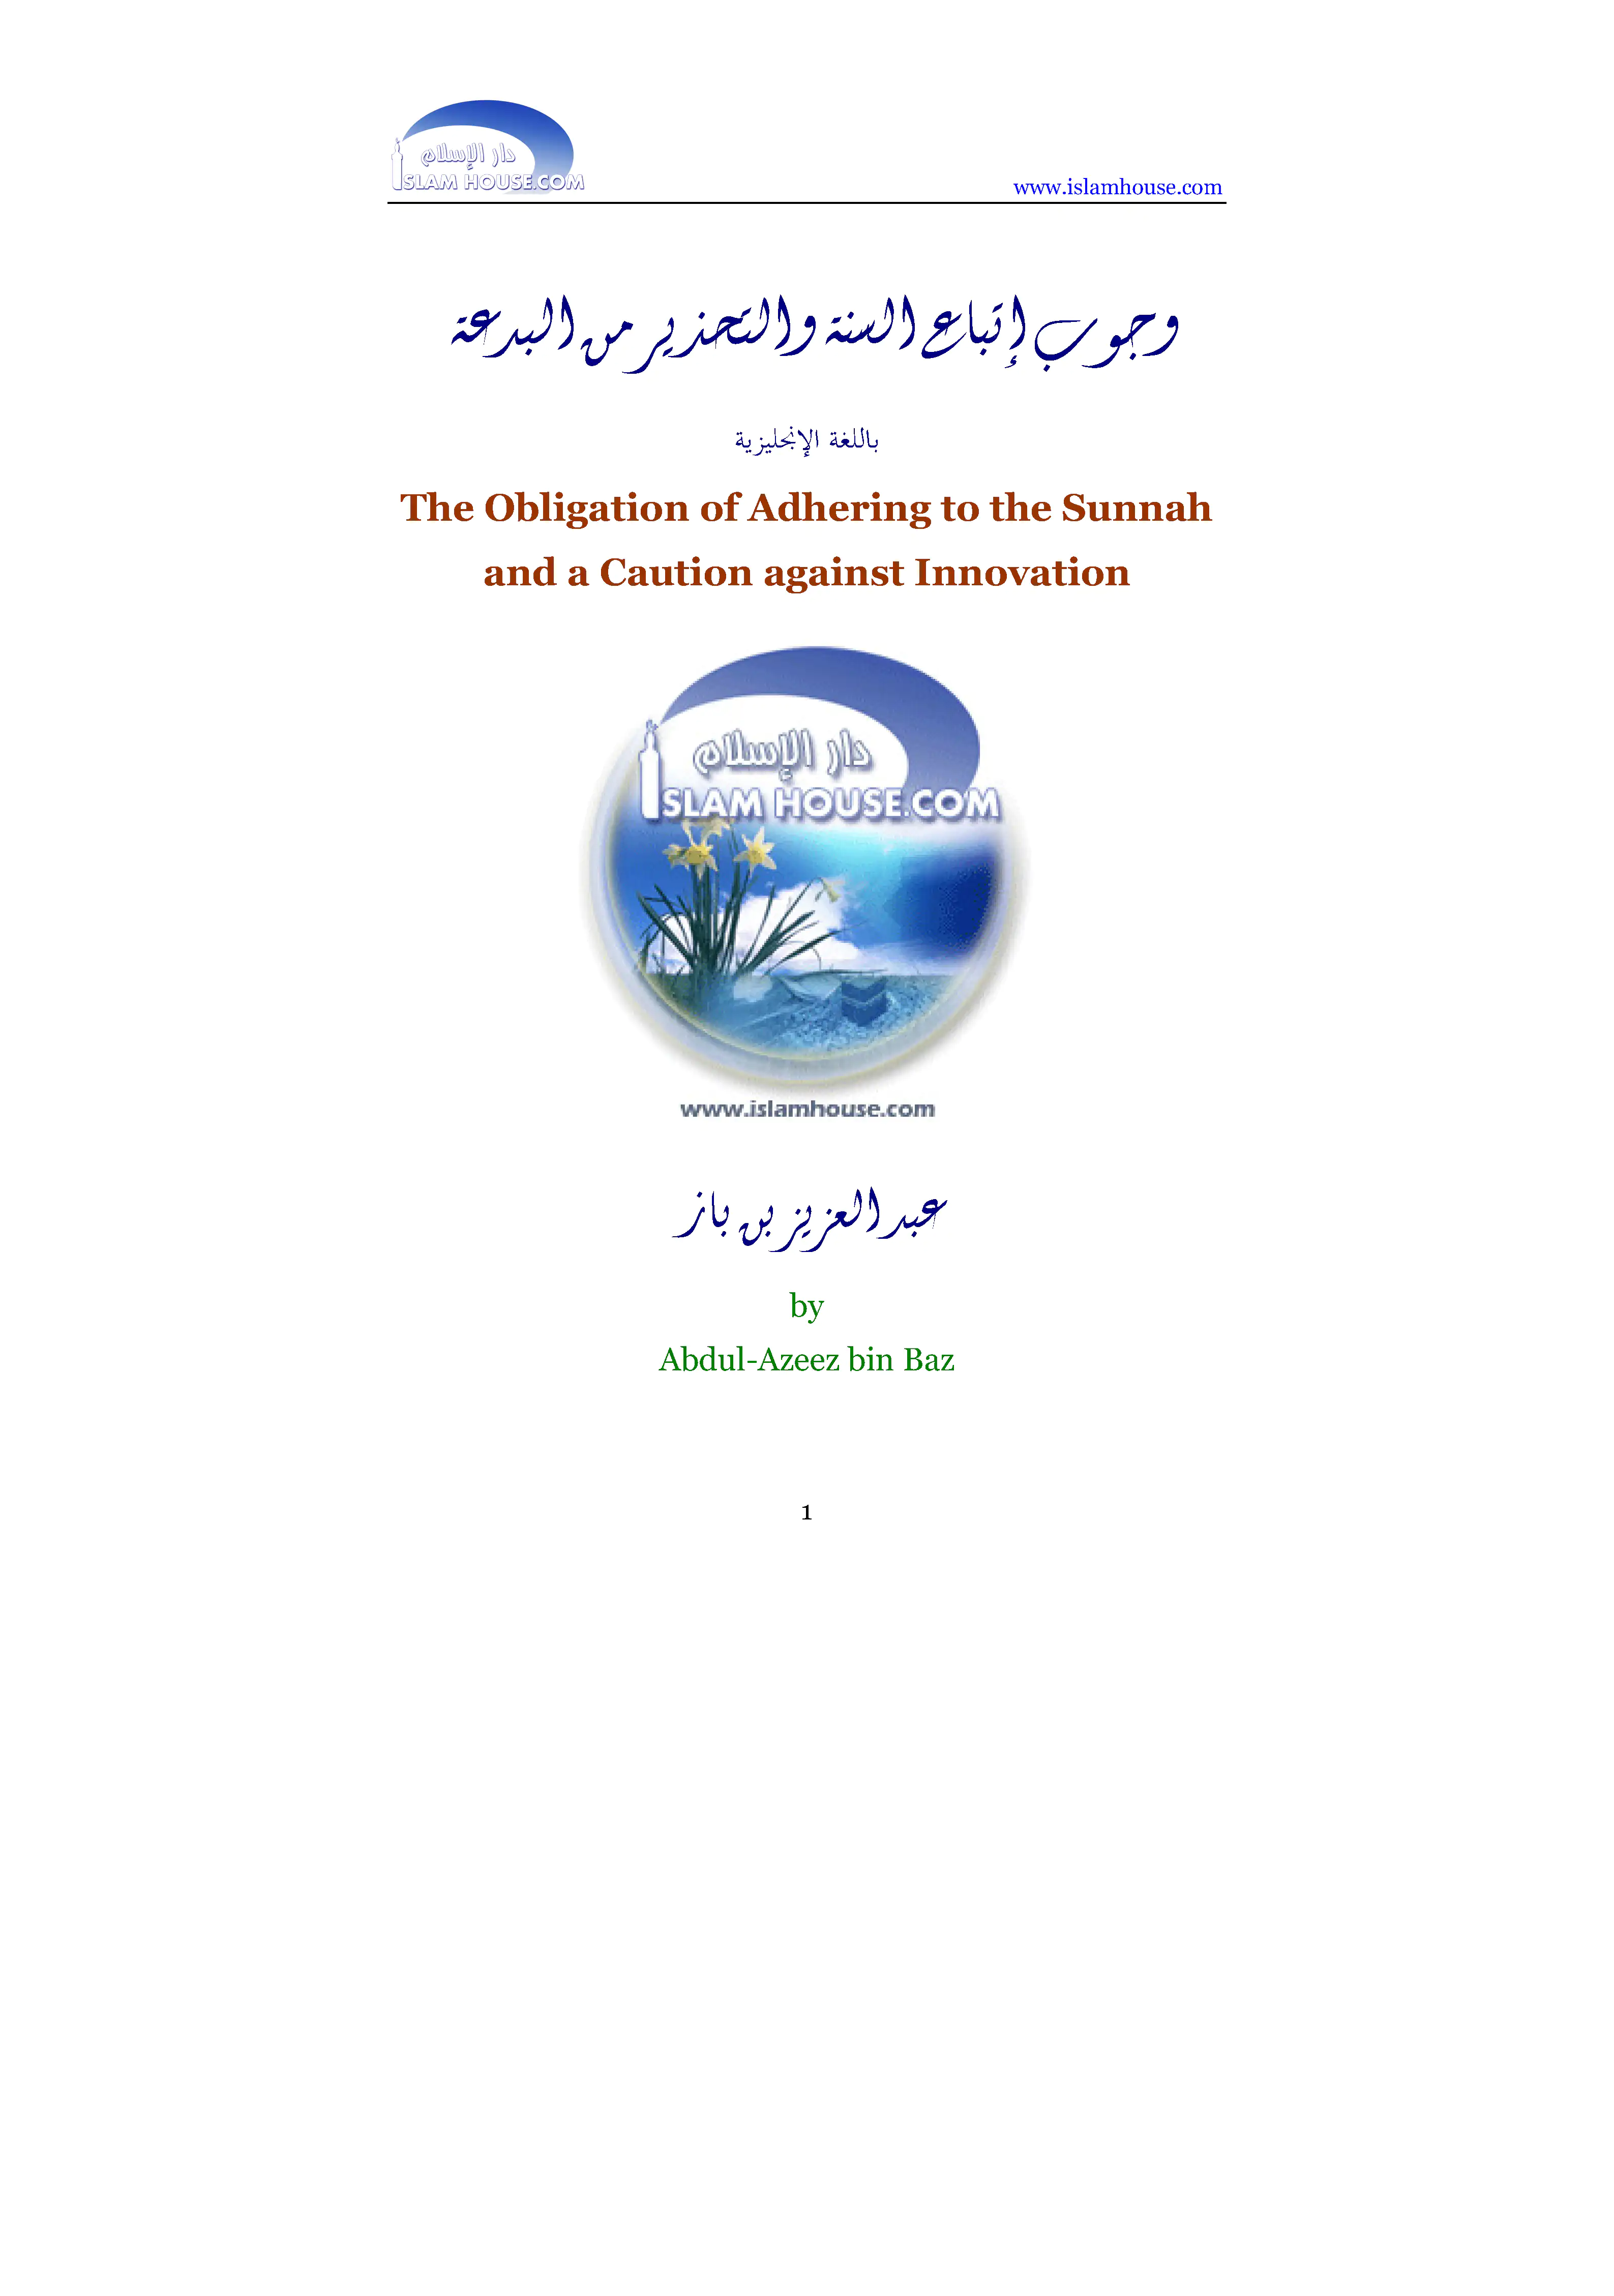 The Obligation of Adhering to the Sunnah and a Caution Against Innovation